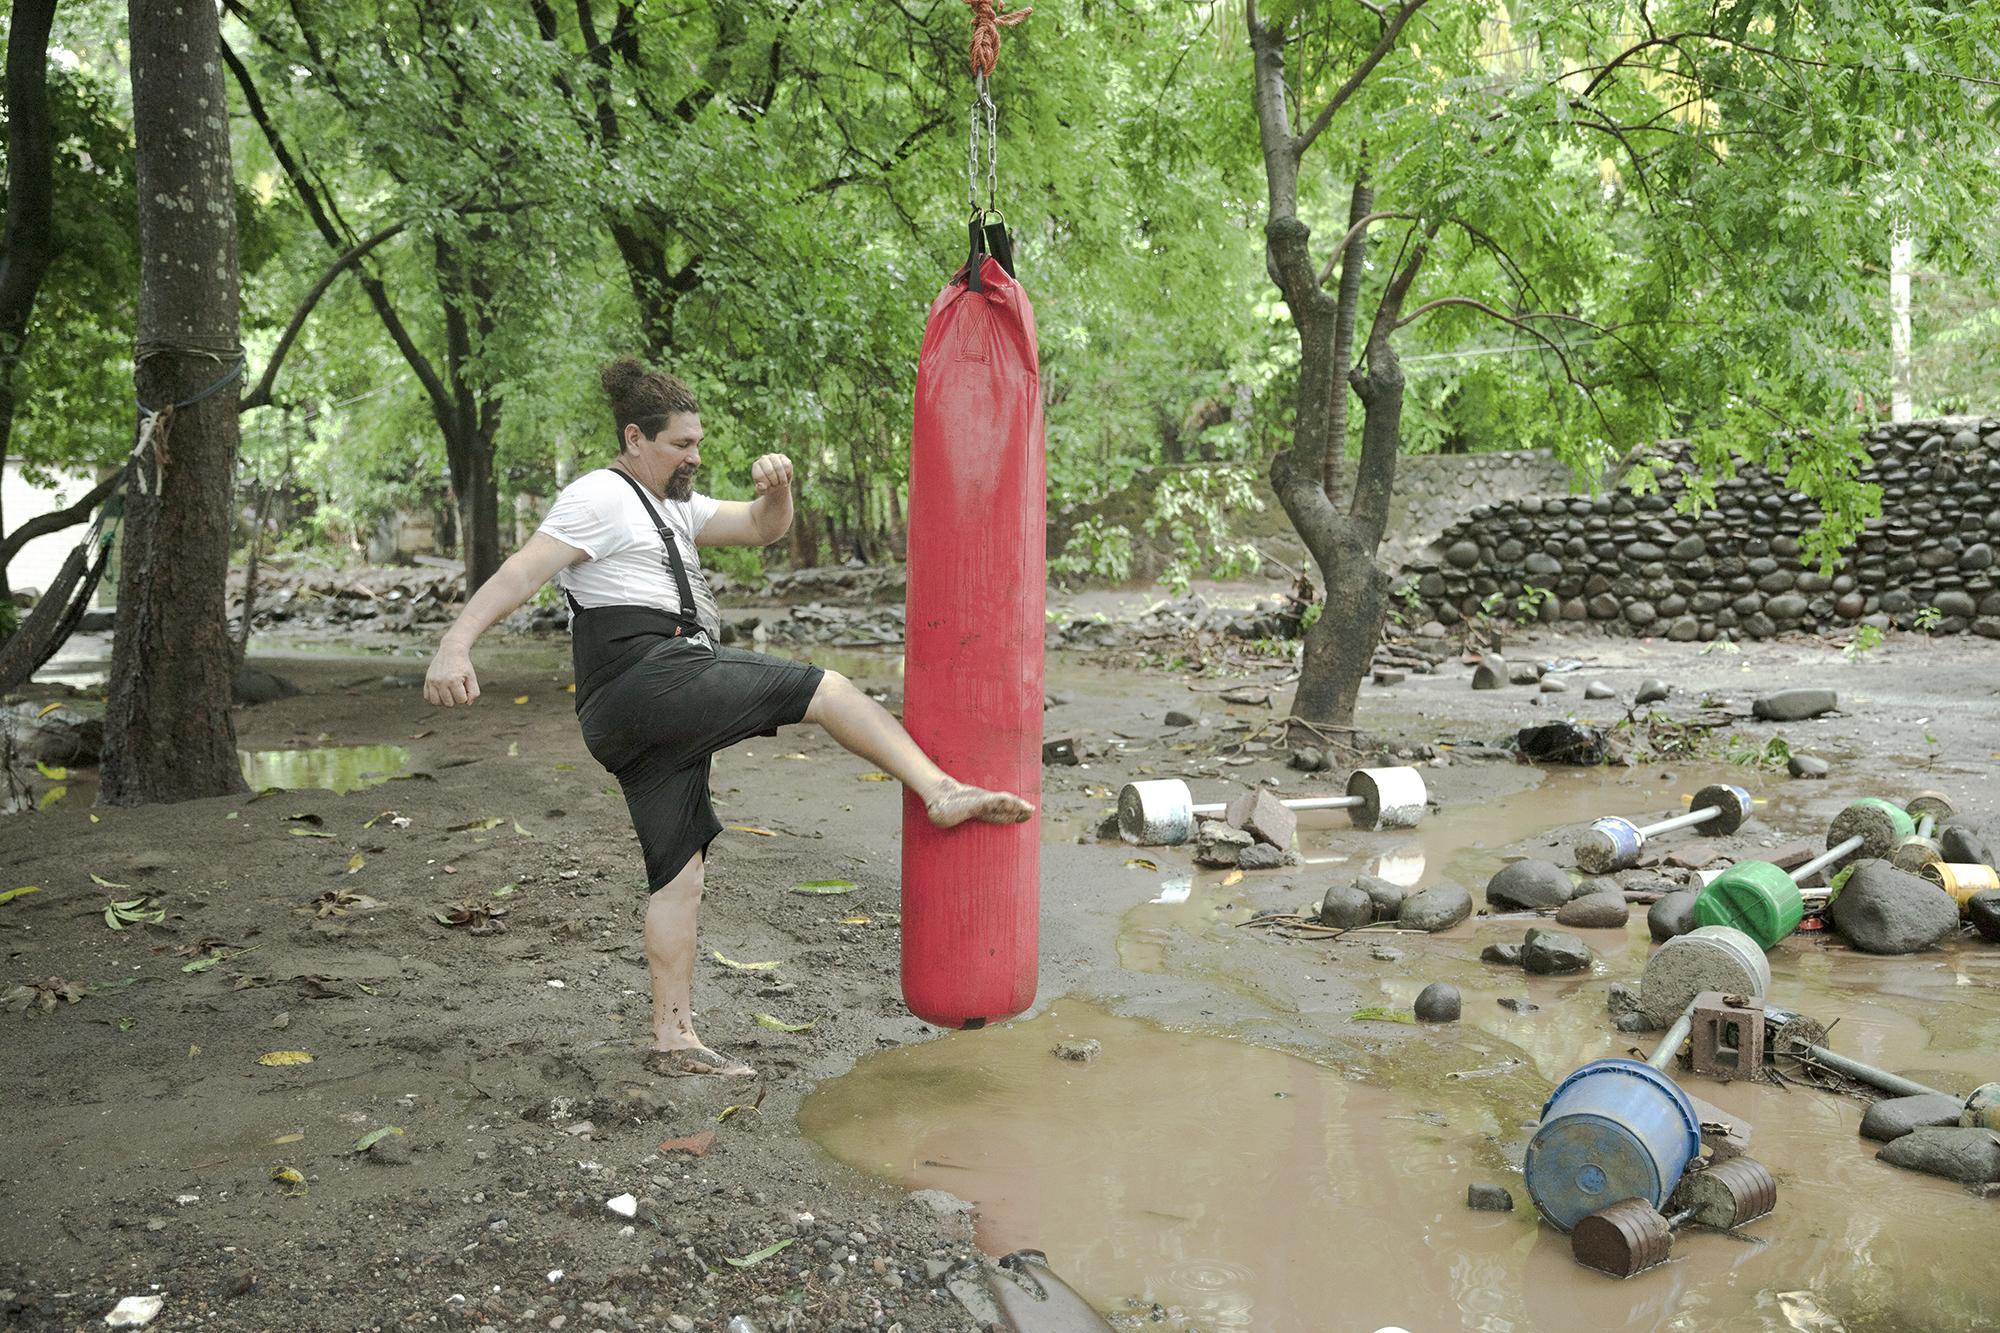 Jaime Abarca strikes a punching bag in what is left of his tiny at-home gym in the Río Grande community of Tamanique, La Libertad. Jaime’s home flooded during Tropical Storm Amanda. Photo: Carlos Barrera/El Faro